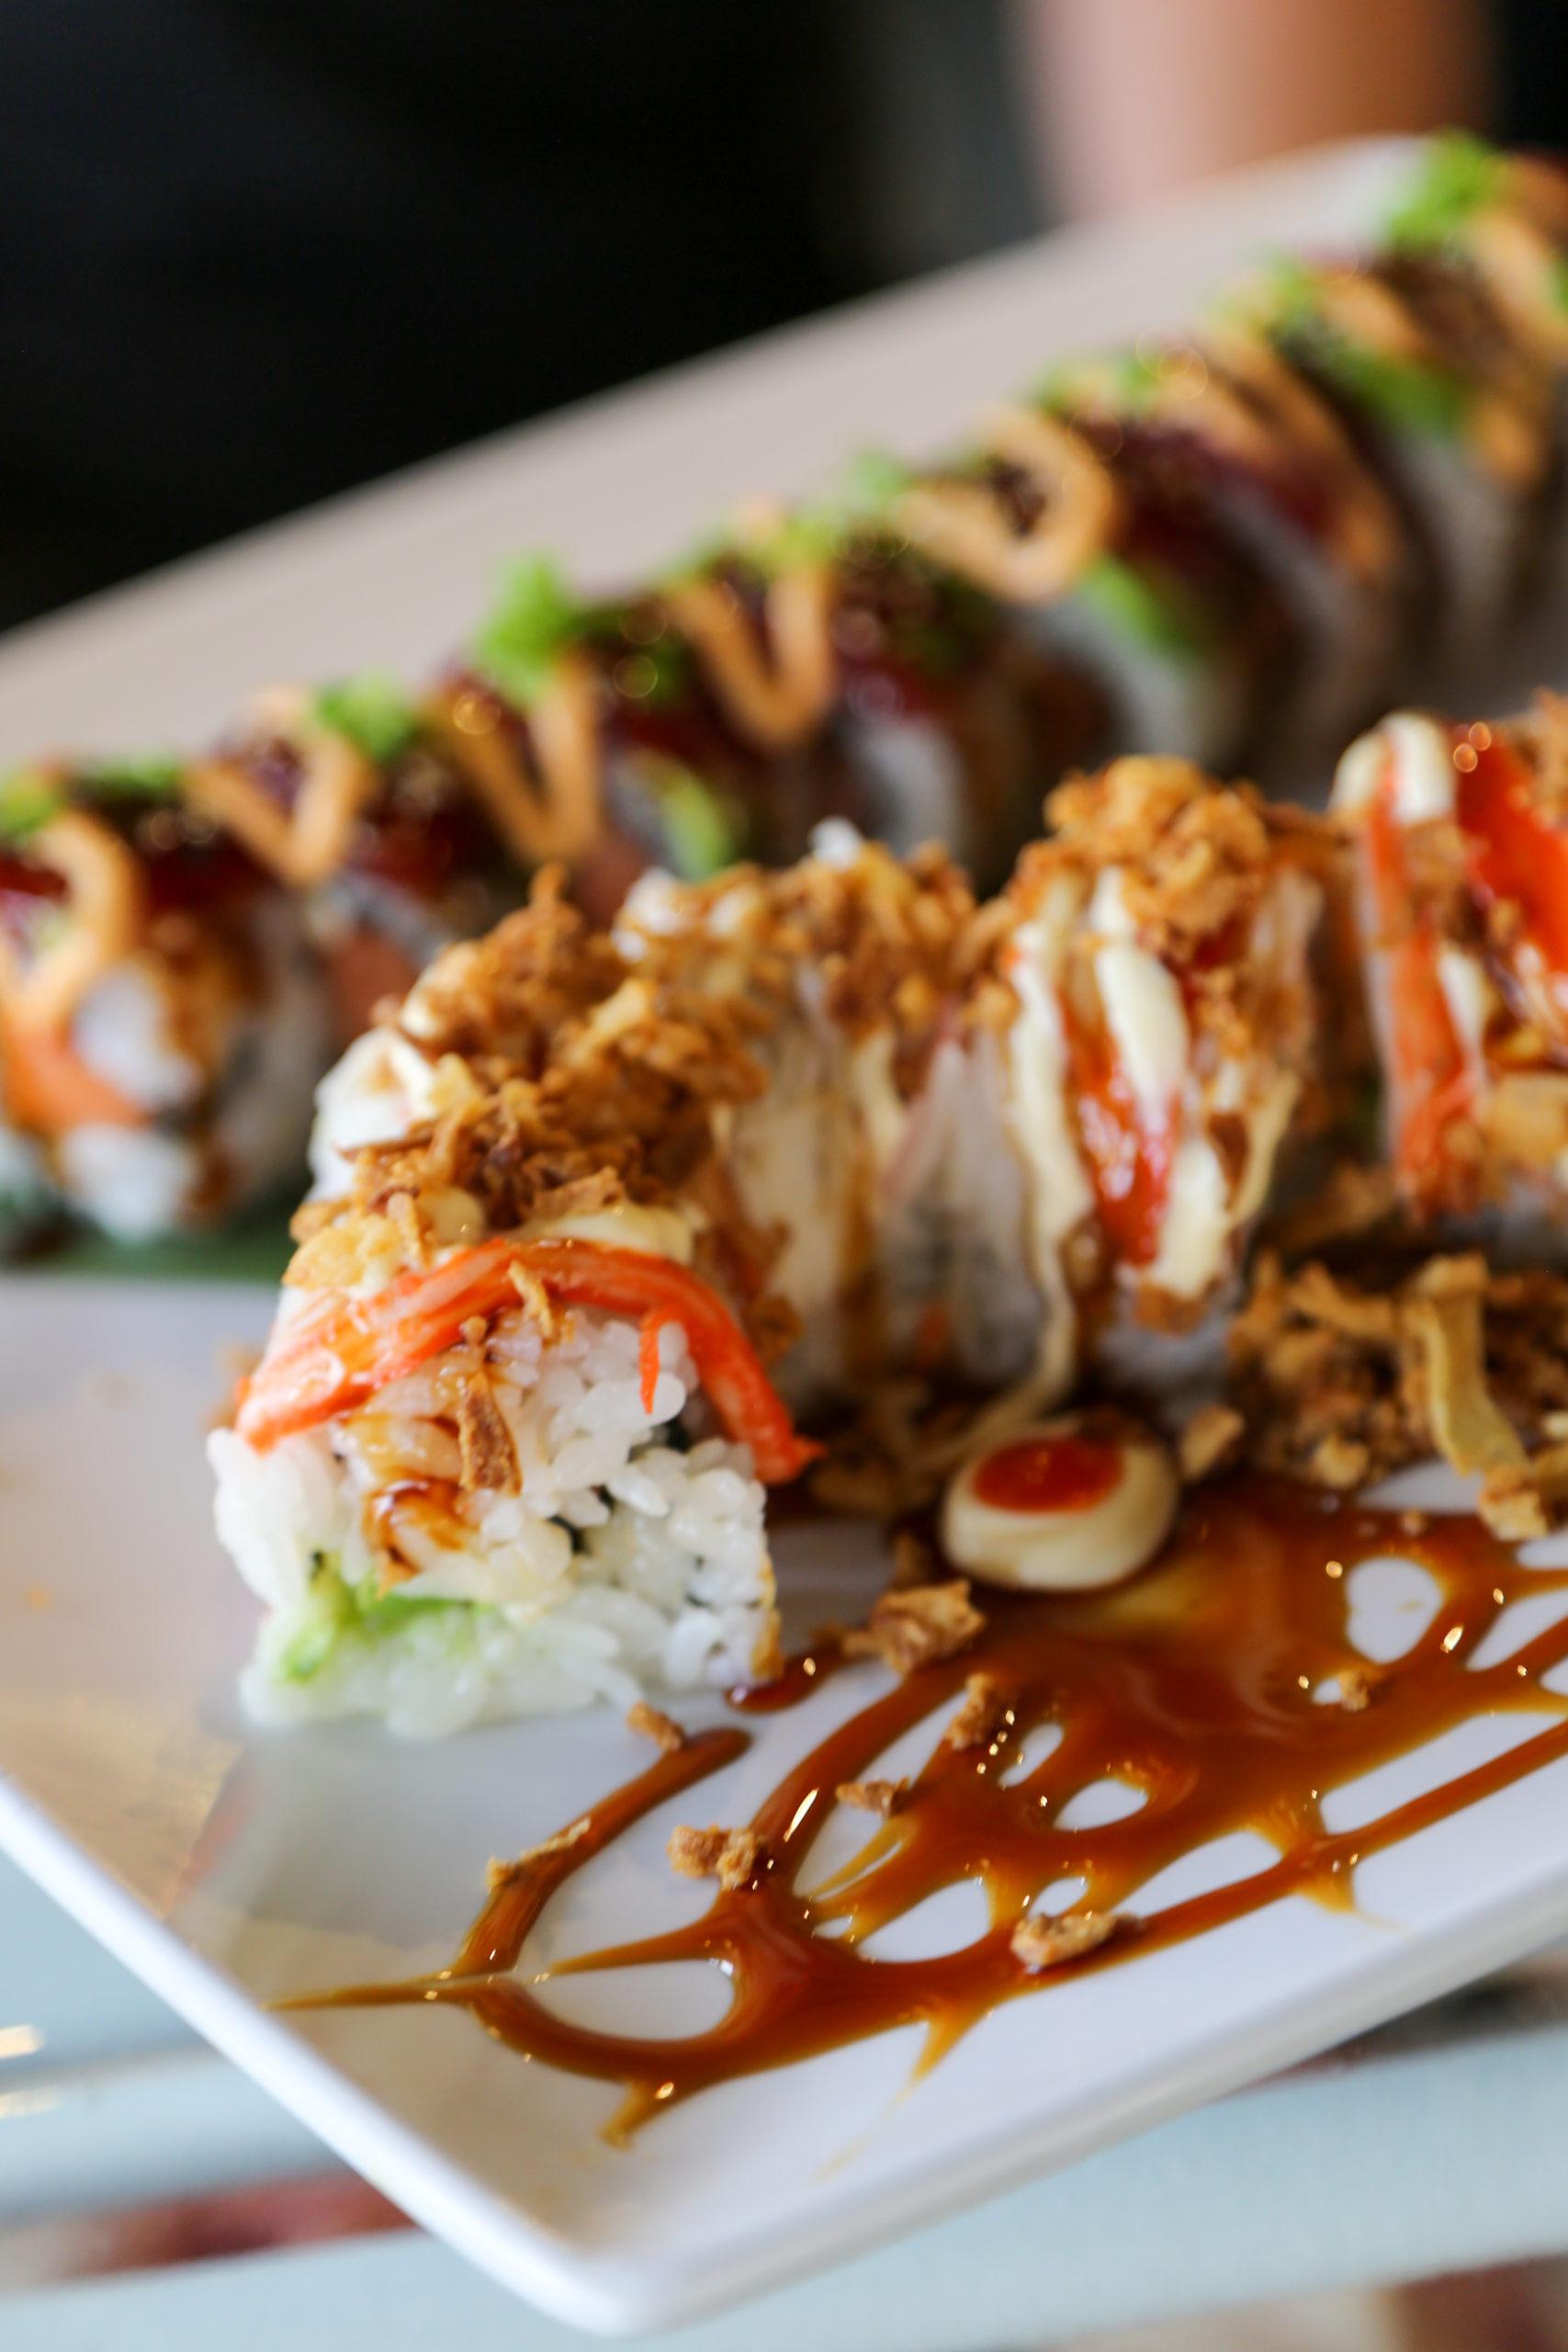 Top+5+sushi+rolls+to+brighten+your+mood